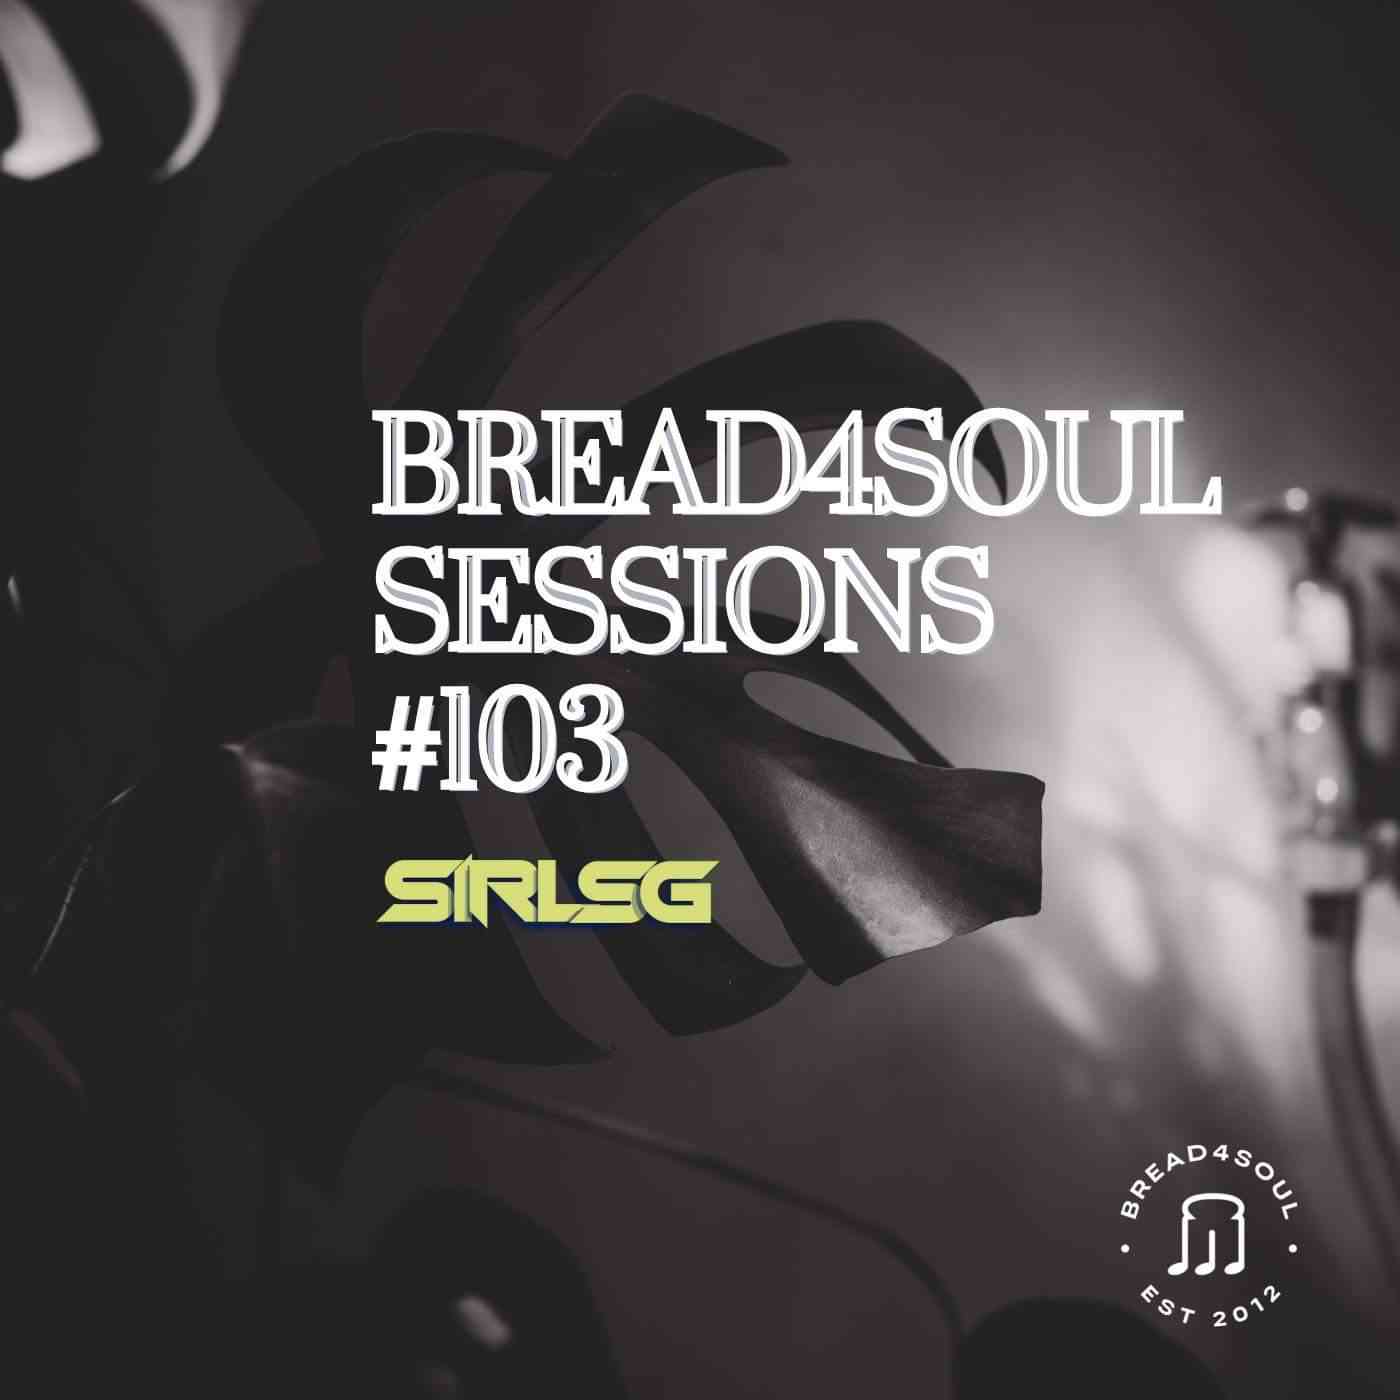 Sir LSG - Bread4Soul Sessions 103